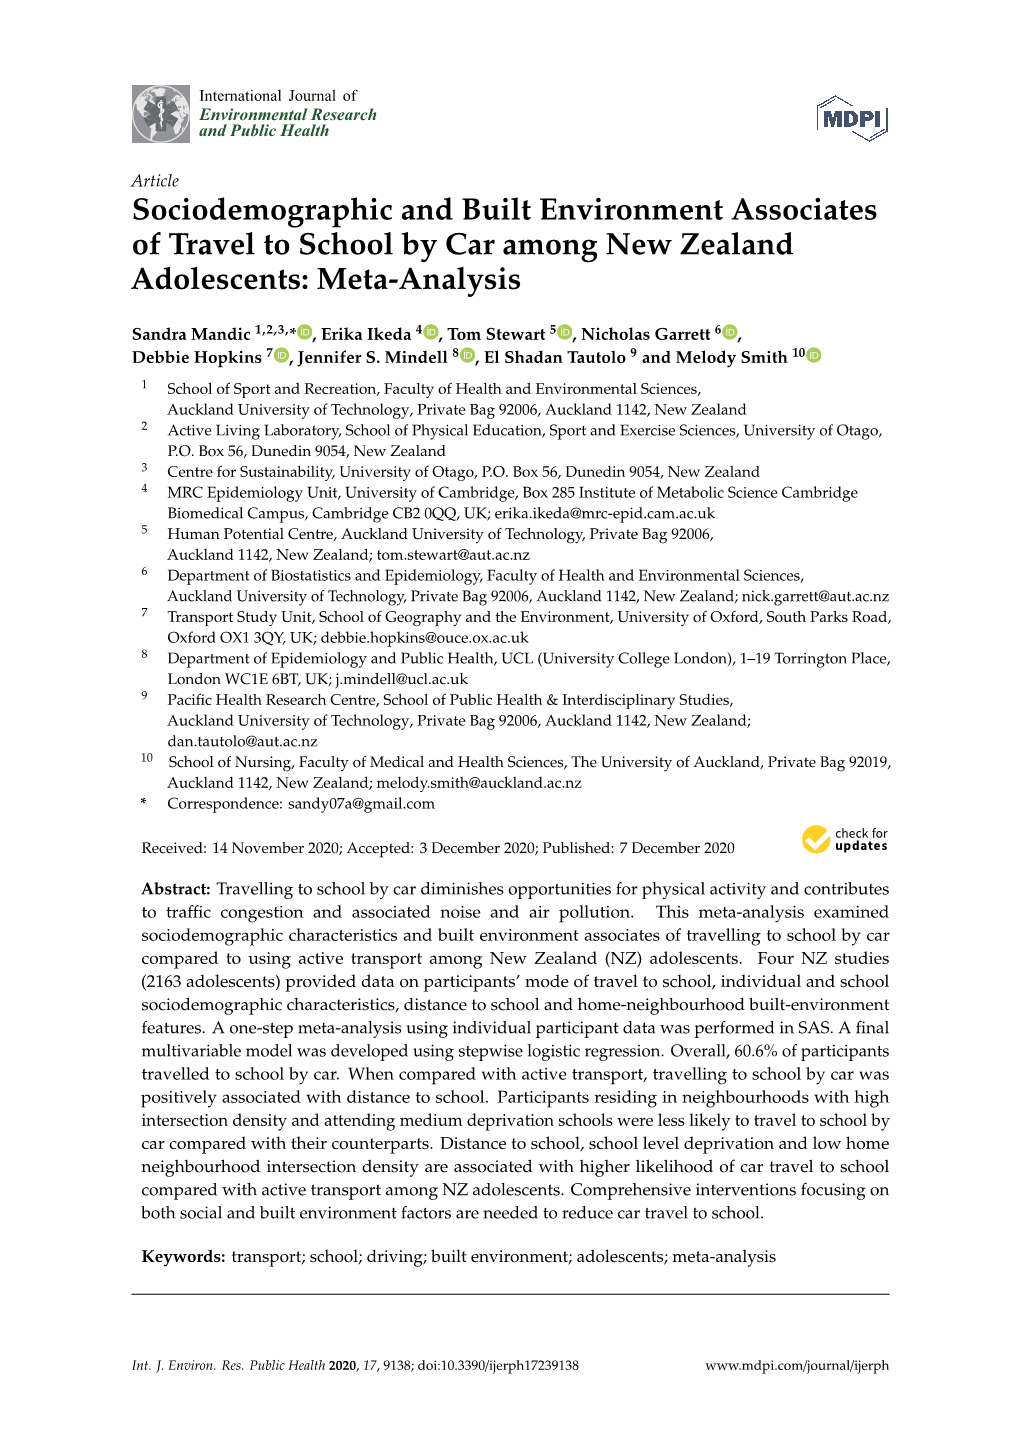 Sociodemographic and Built Environment Associates of Travel to School by Car Among New Zealand Adolescents: Meta-Analysis